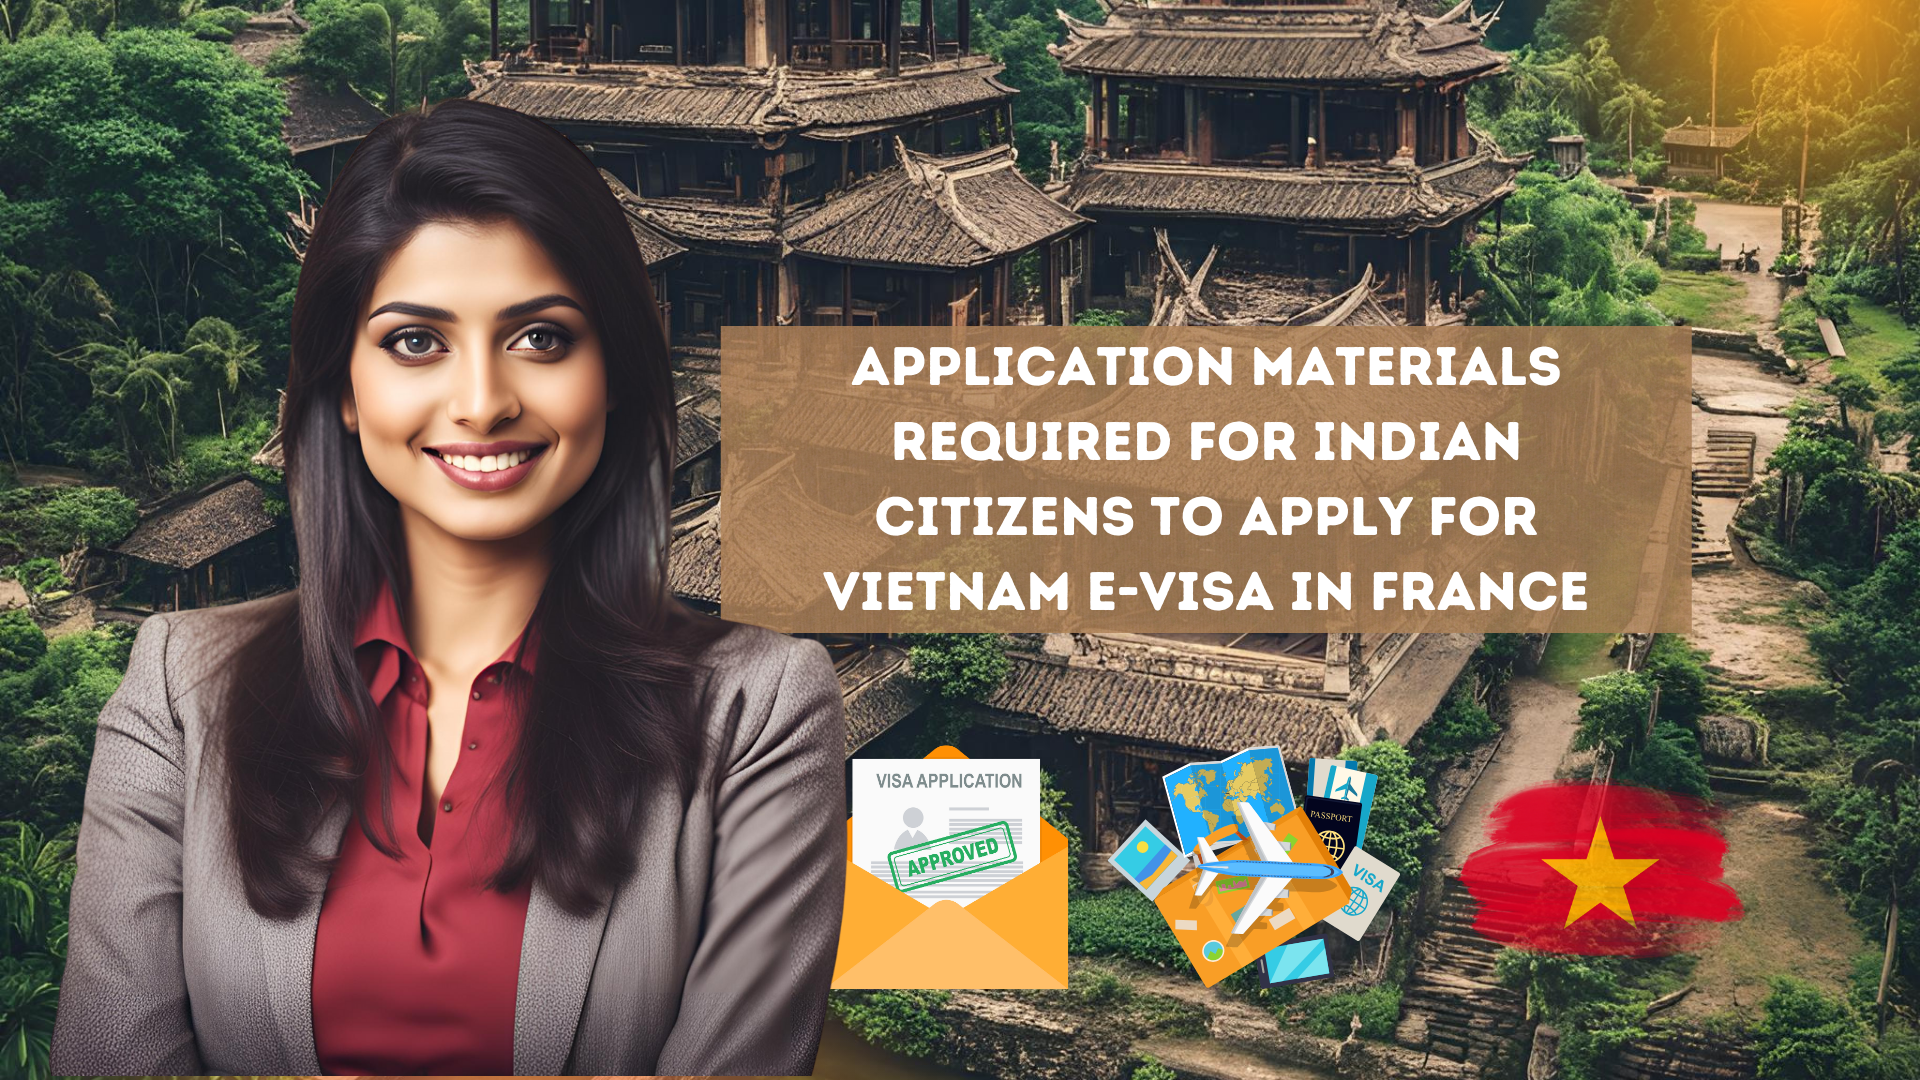 Application materials required for Indian citizens to apply for Vietnam e-visa in France